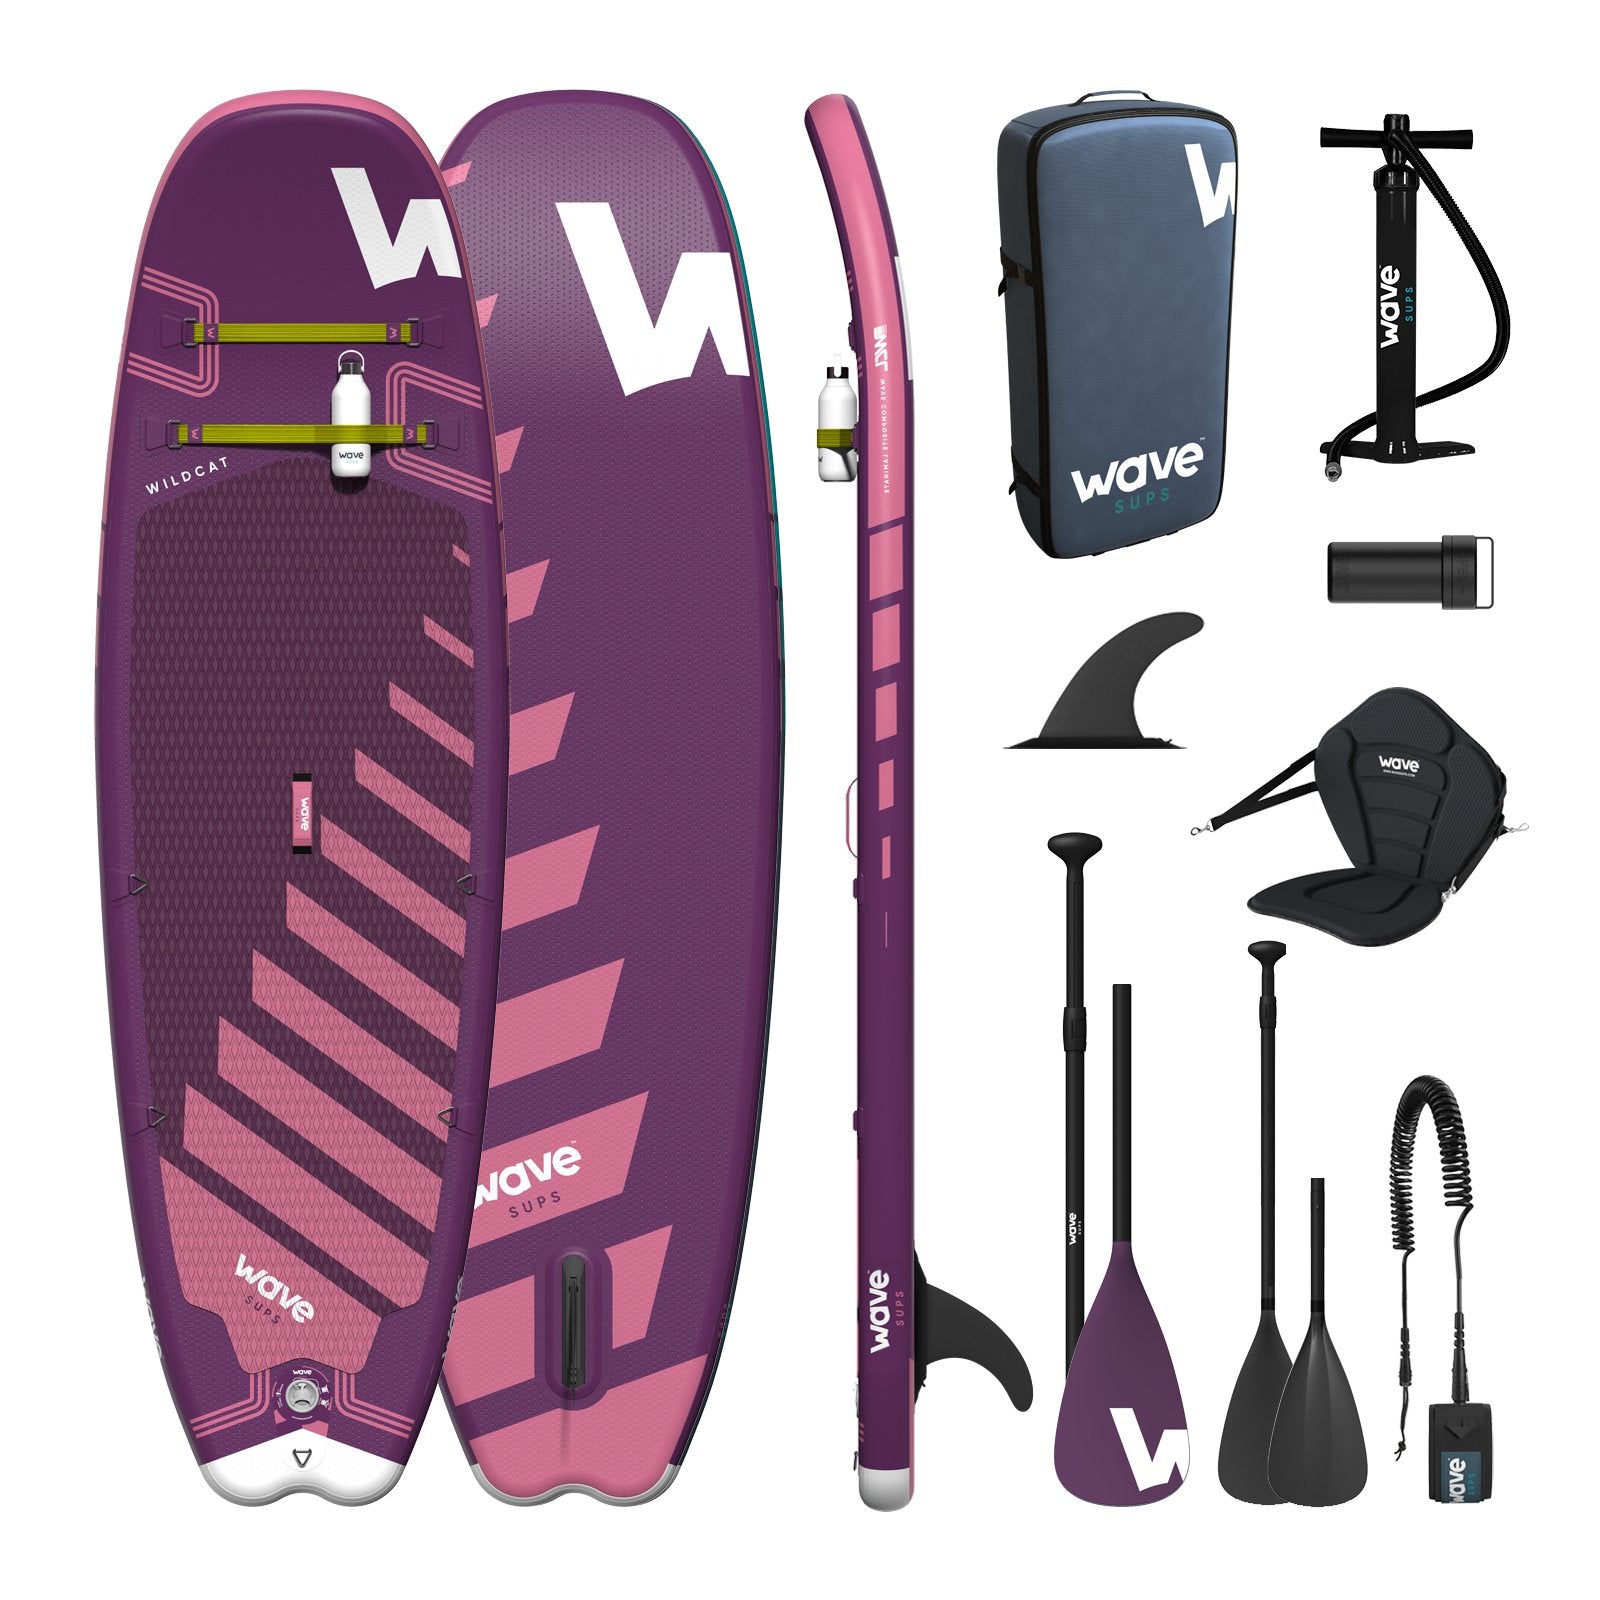 Wildcat SUP & Kayak | Inflatable Stand-Up Paddleboard | 8.6ft | Purple - Wave Sups EU